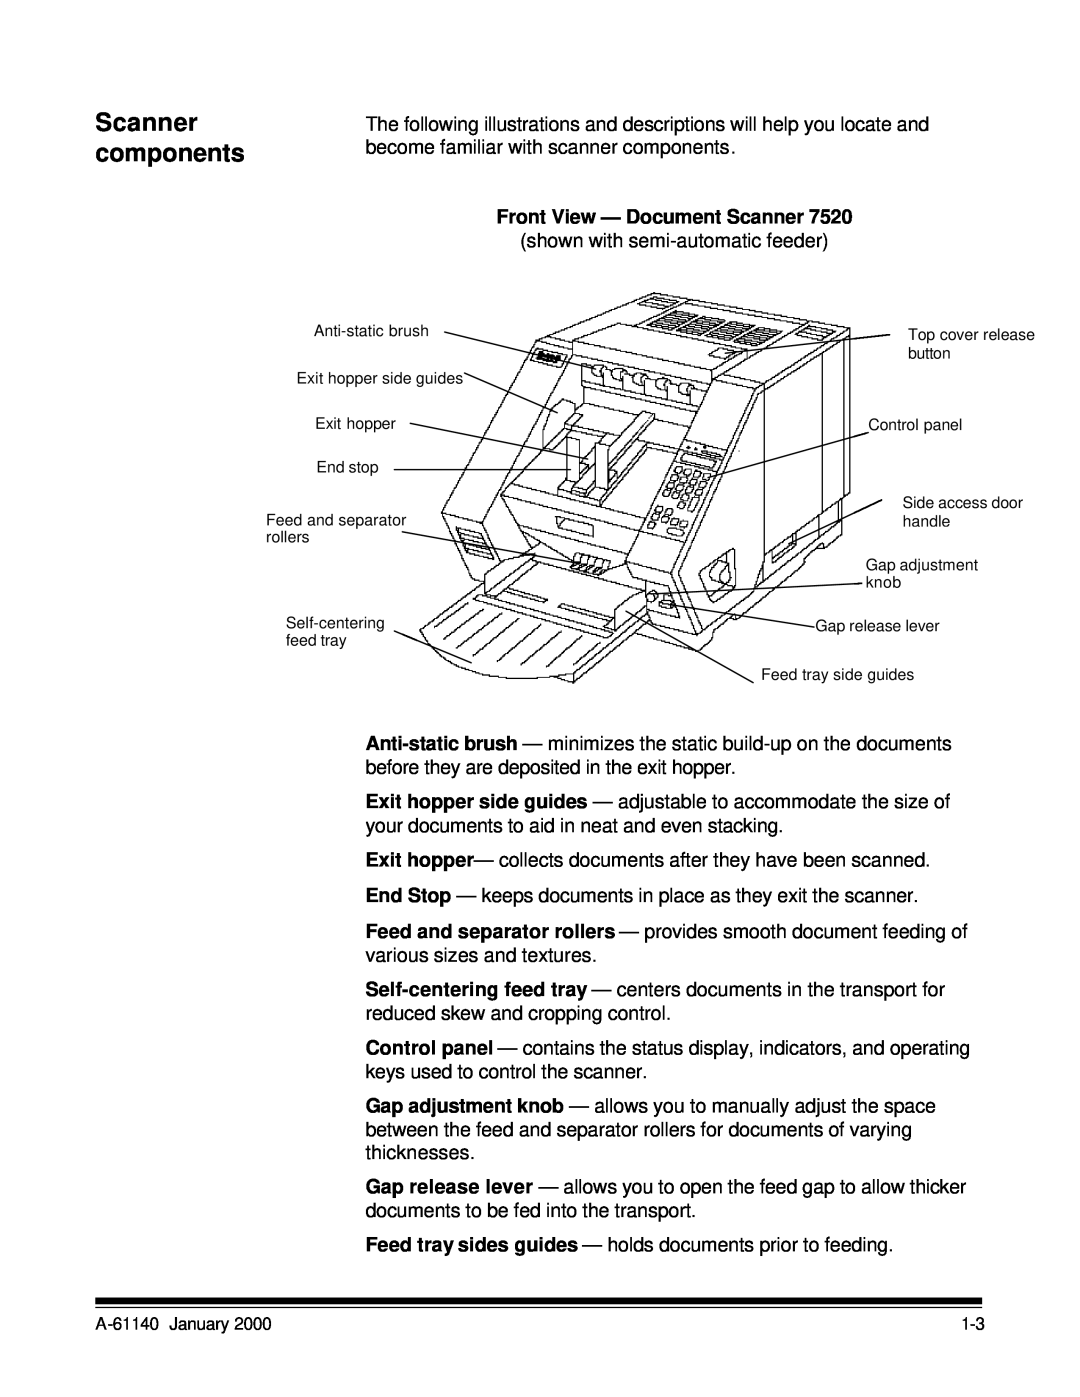 Kodak 7520 manual Scanner components, Front View - Document Scanner 